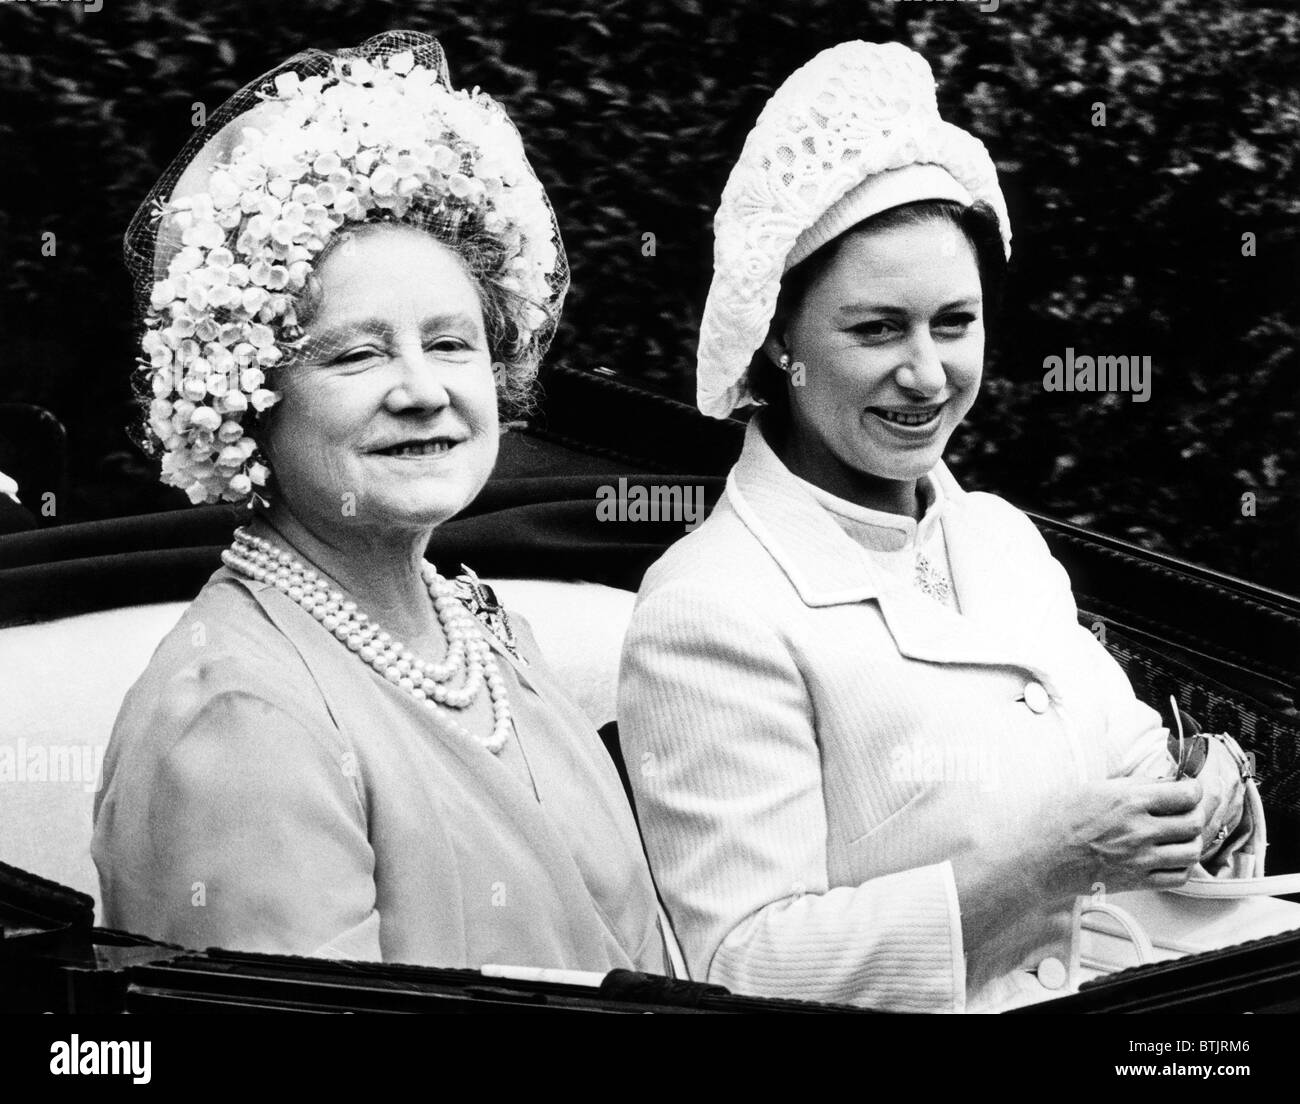 Queen Elizabeth (the Queen Mother), Princess Margaret, arriving on the first day of the Royal Ascot Races in England, 1968. Stock Photo